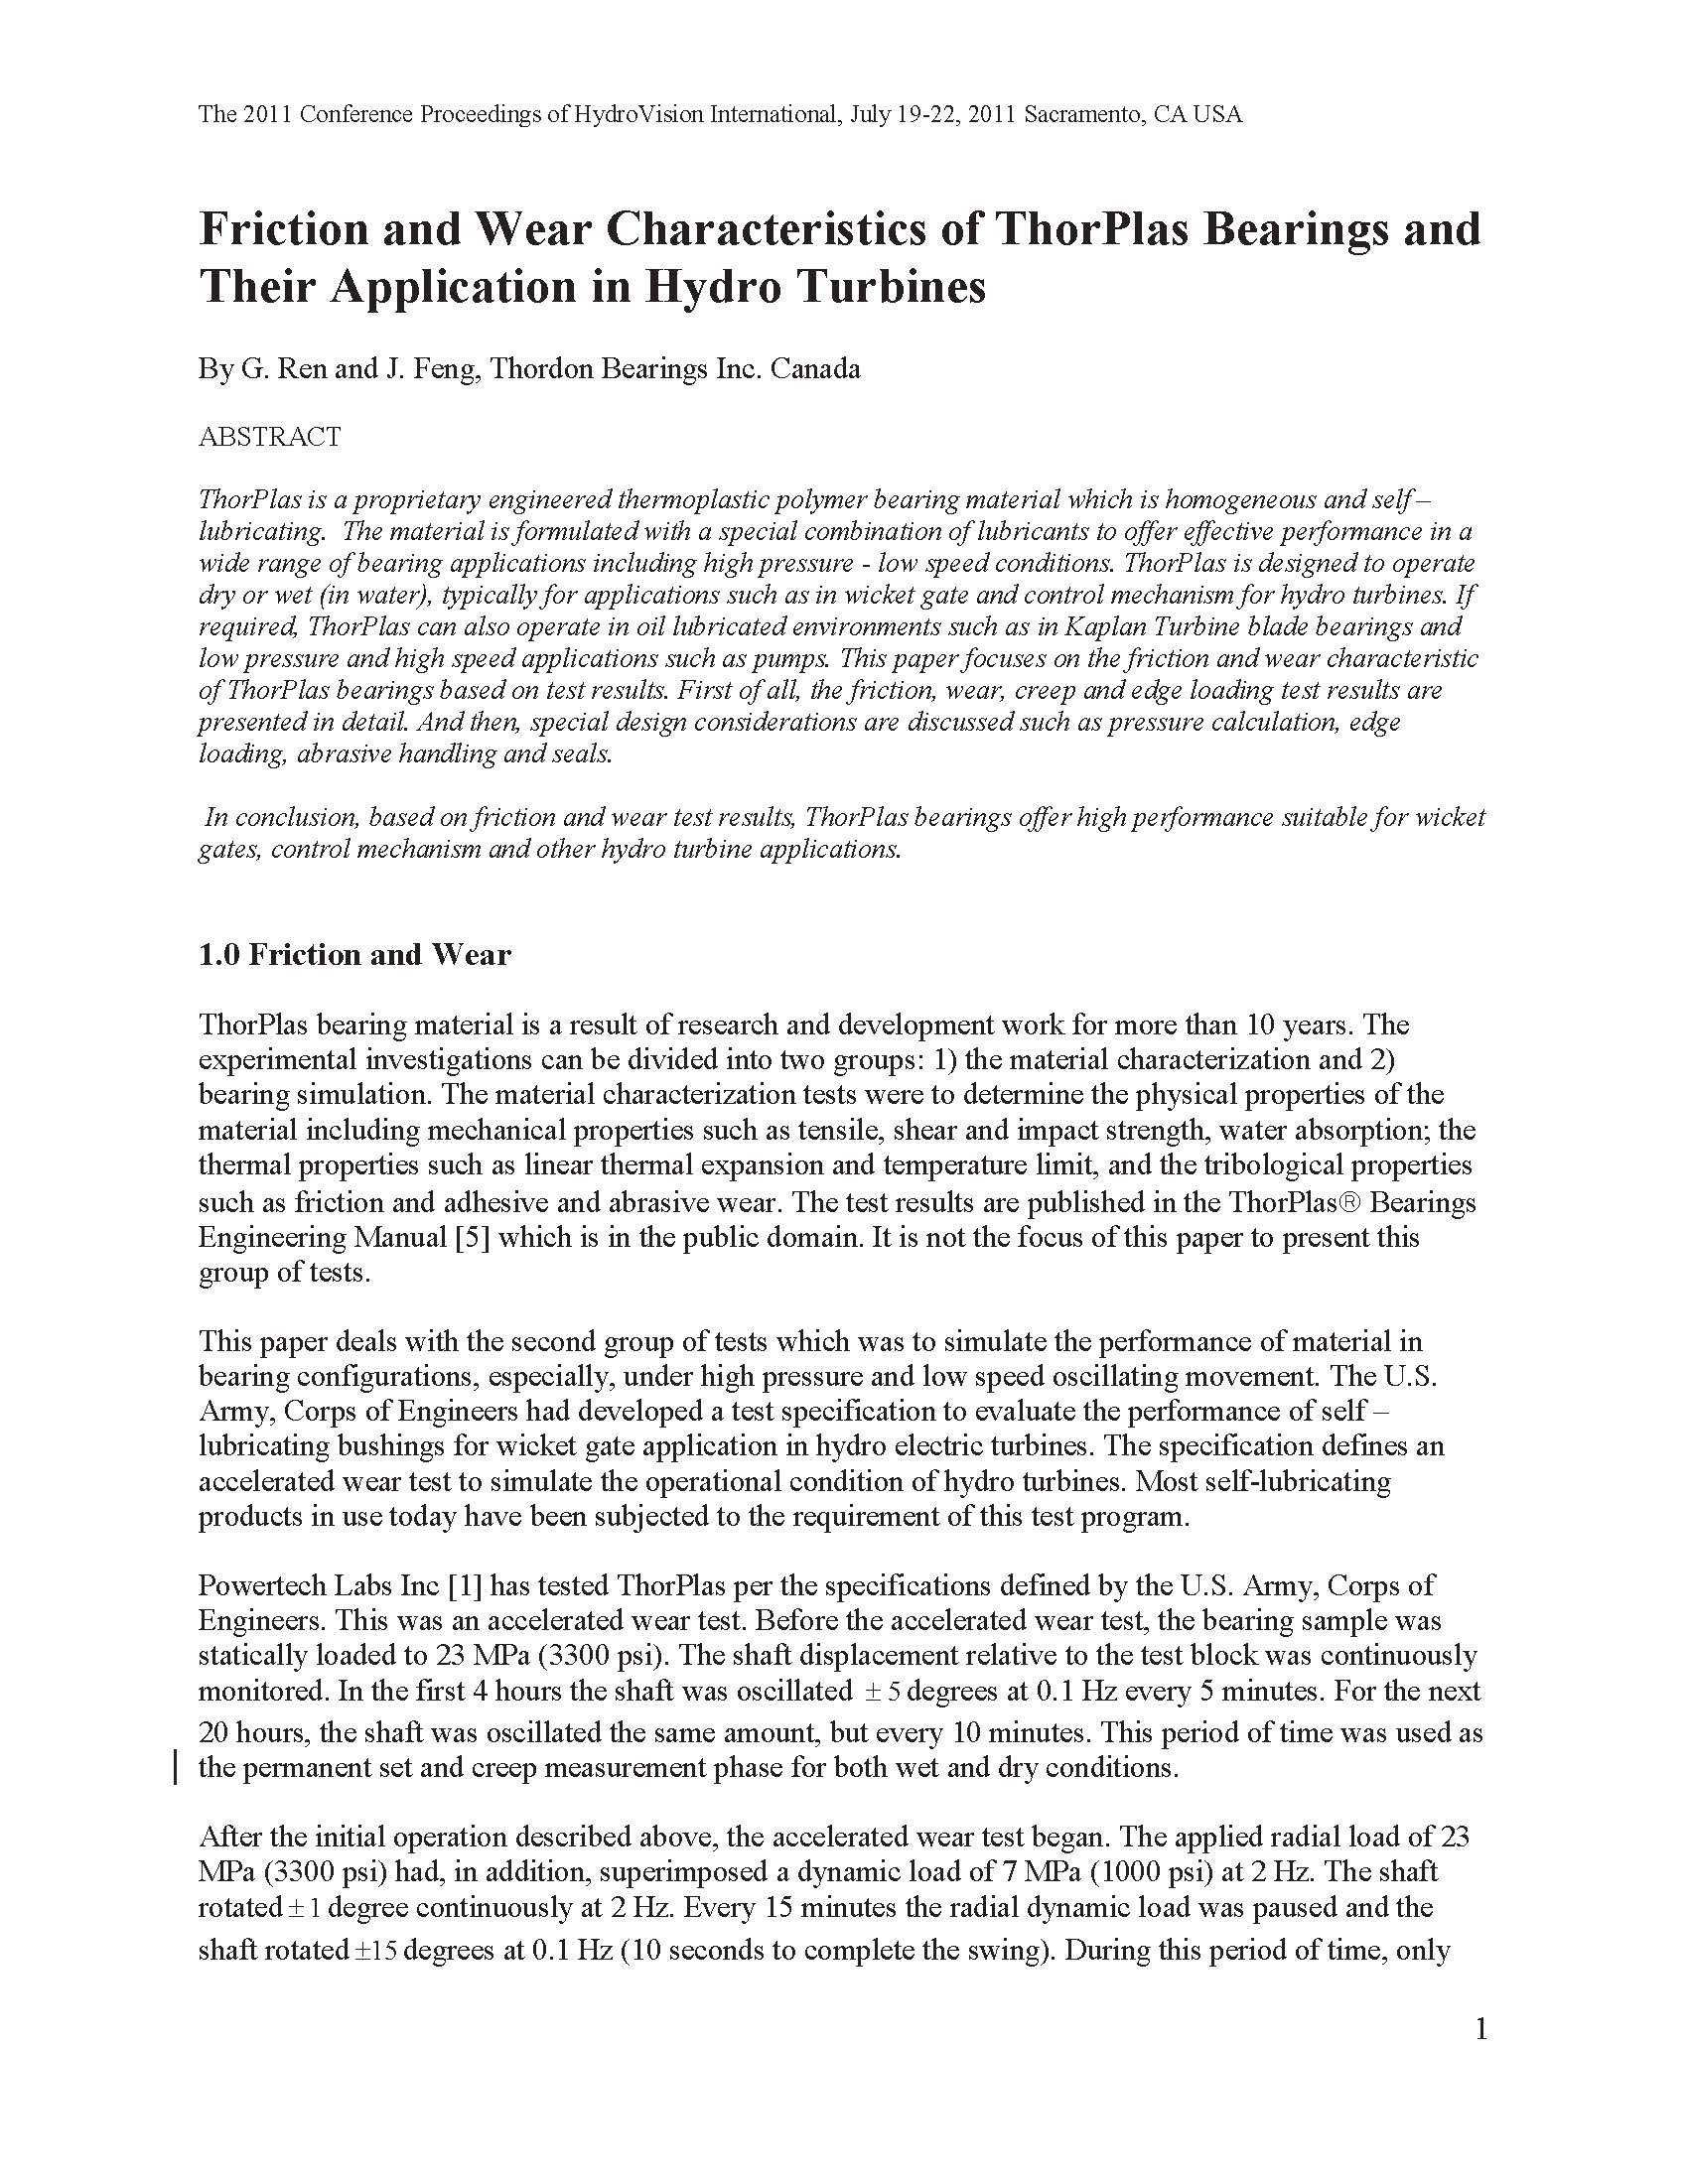 Friction and Wear Characterisitics of ThorPlas Bearings and their Applications in Hydro-turbines